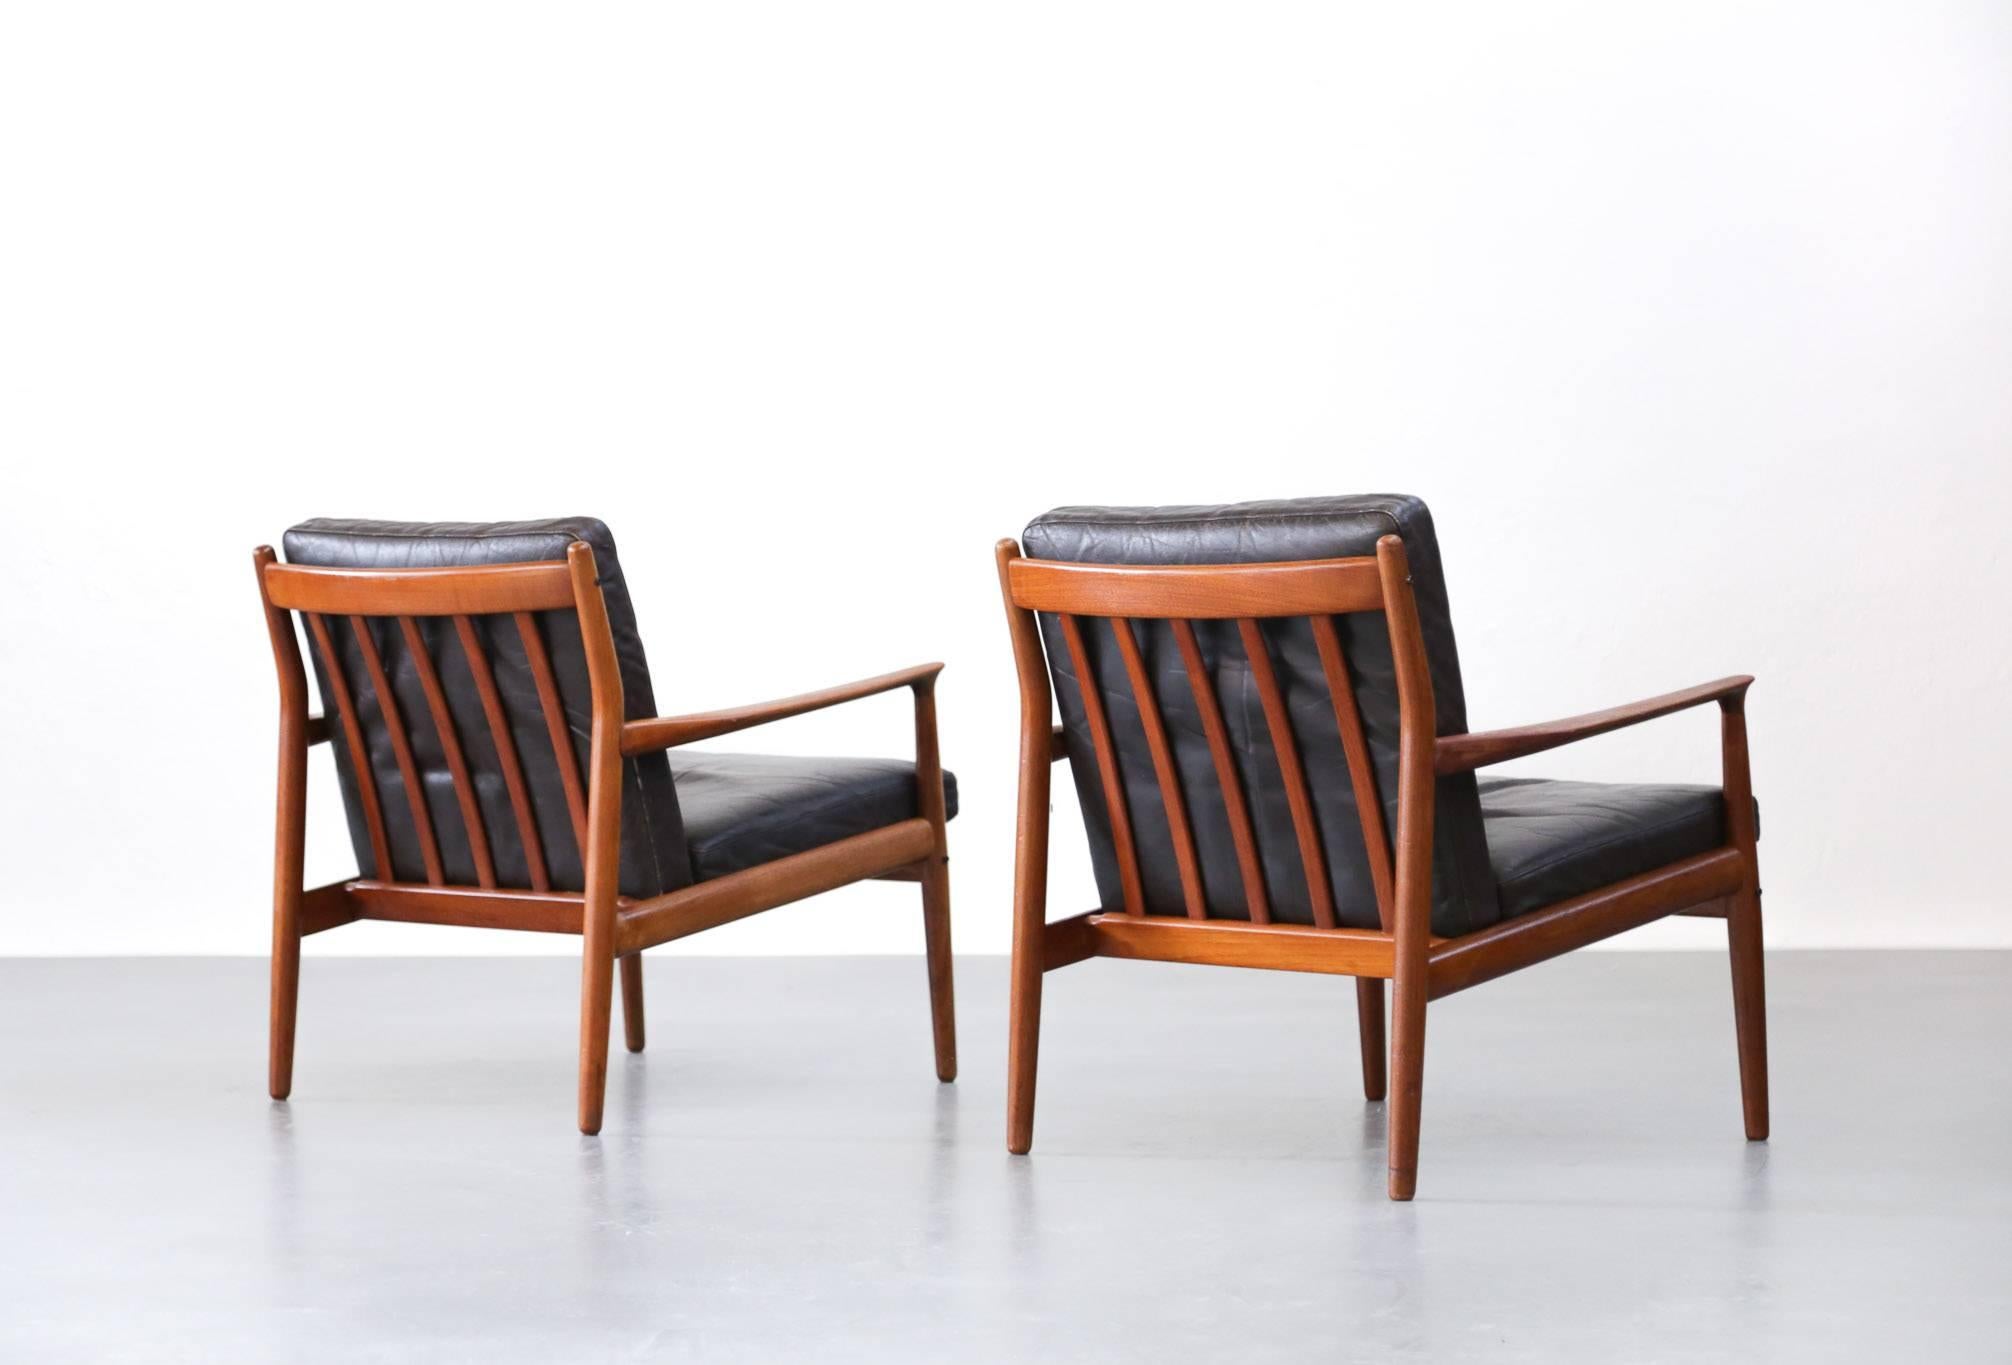 20th Century Pair of Grete Jalk Leather Armchairs for Glostrup